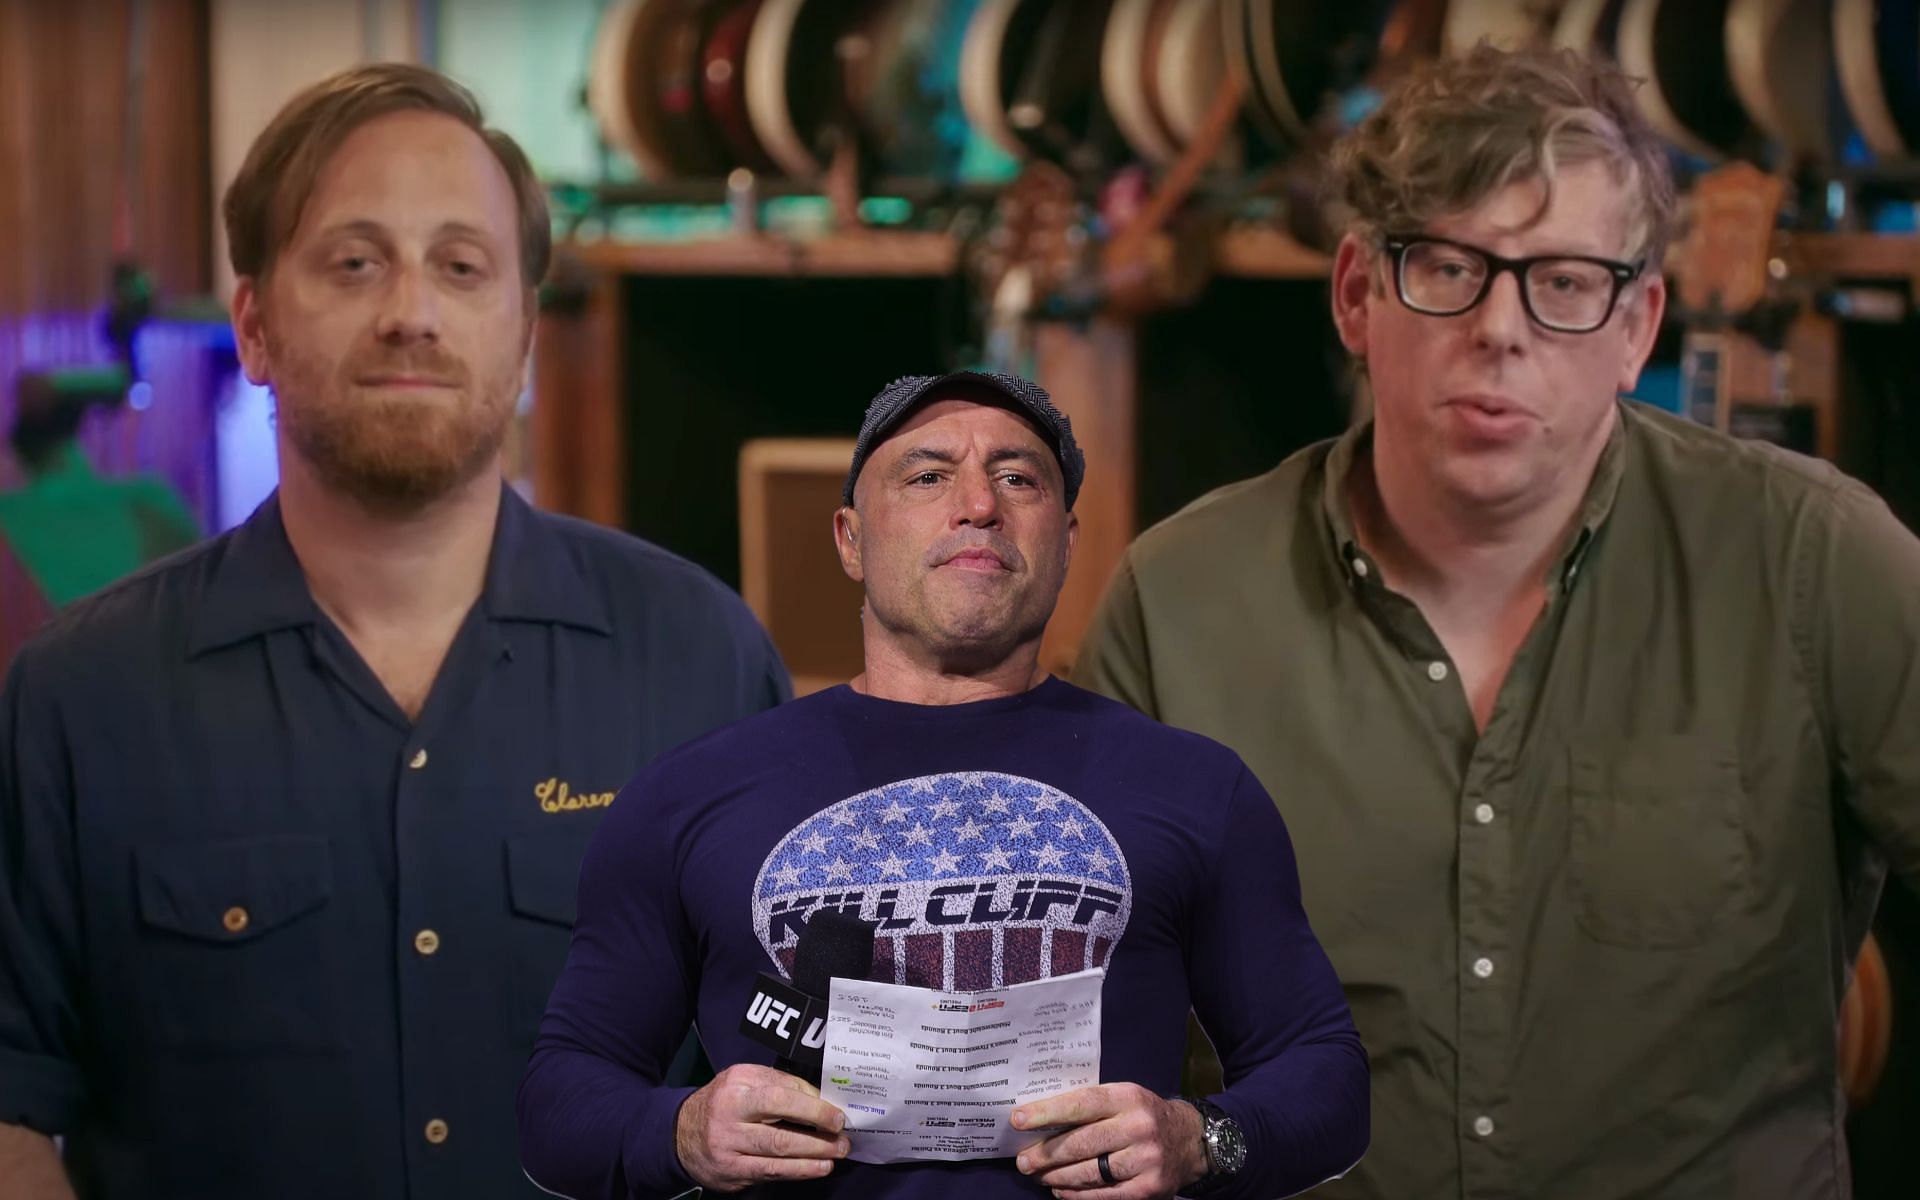 Dan Auerbach (left), Joe Rogan (center) and Pat Carney (right) (Images via YouTube / FunnyOrDie and Getty)